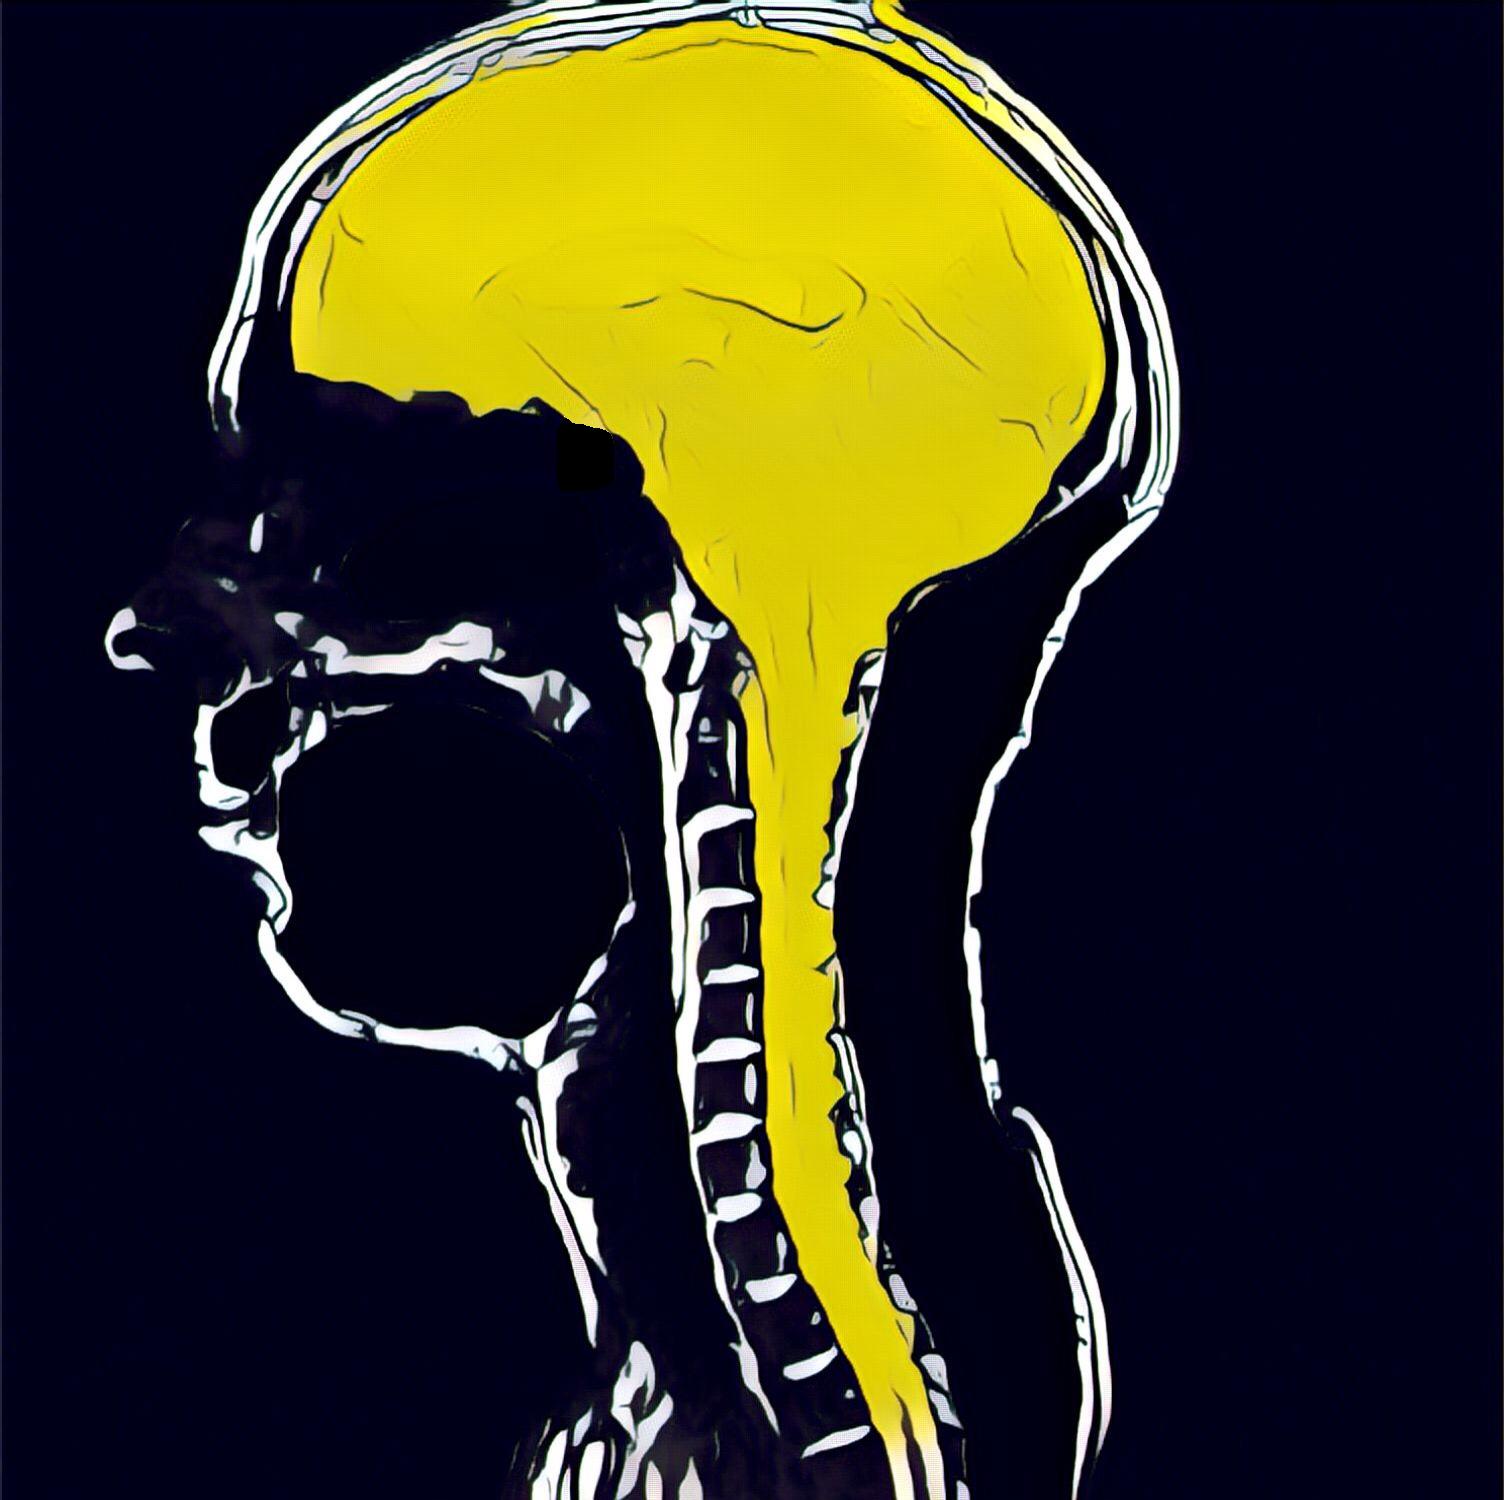 Image of brain scan. Brain and spinal cord is colored as bright yellow and the rest of the background is black.